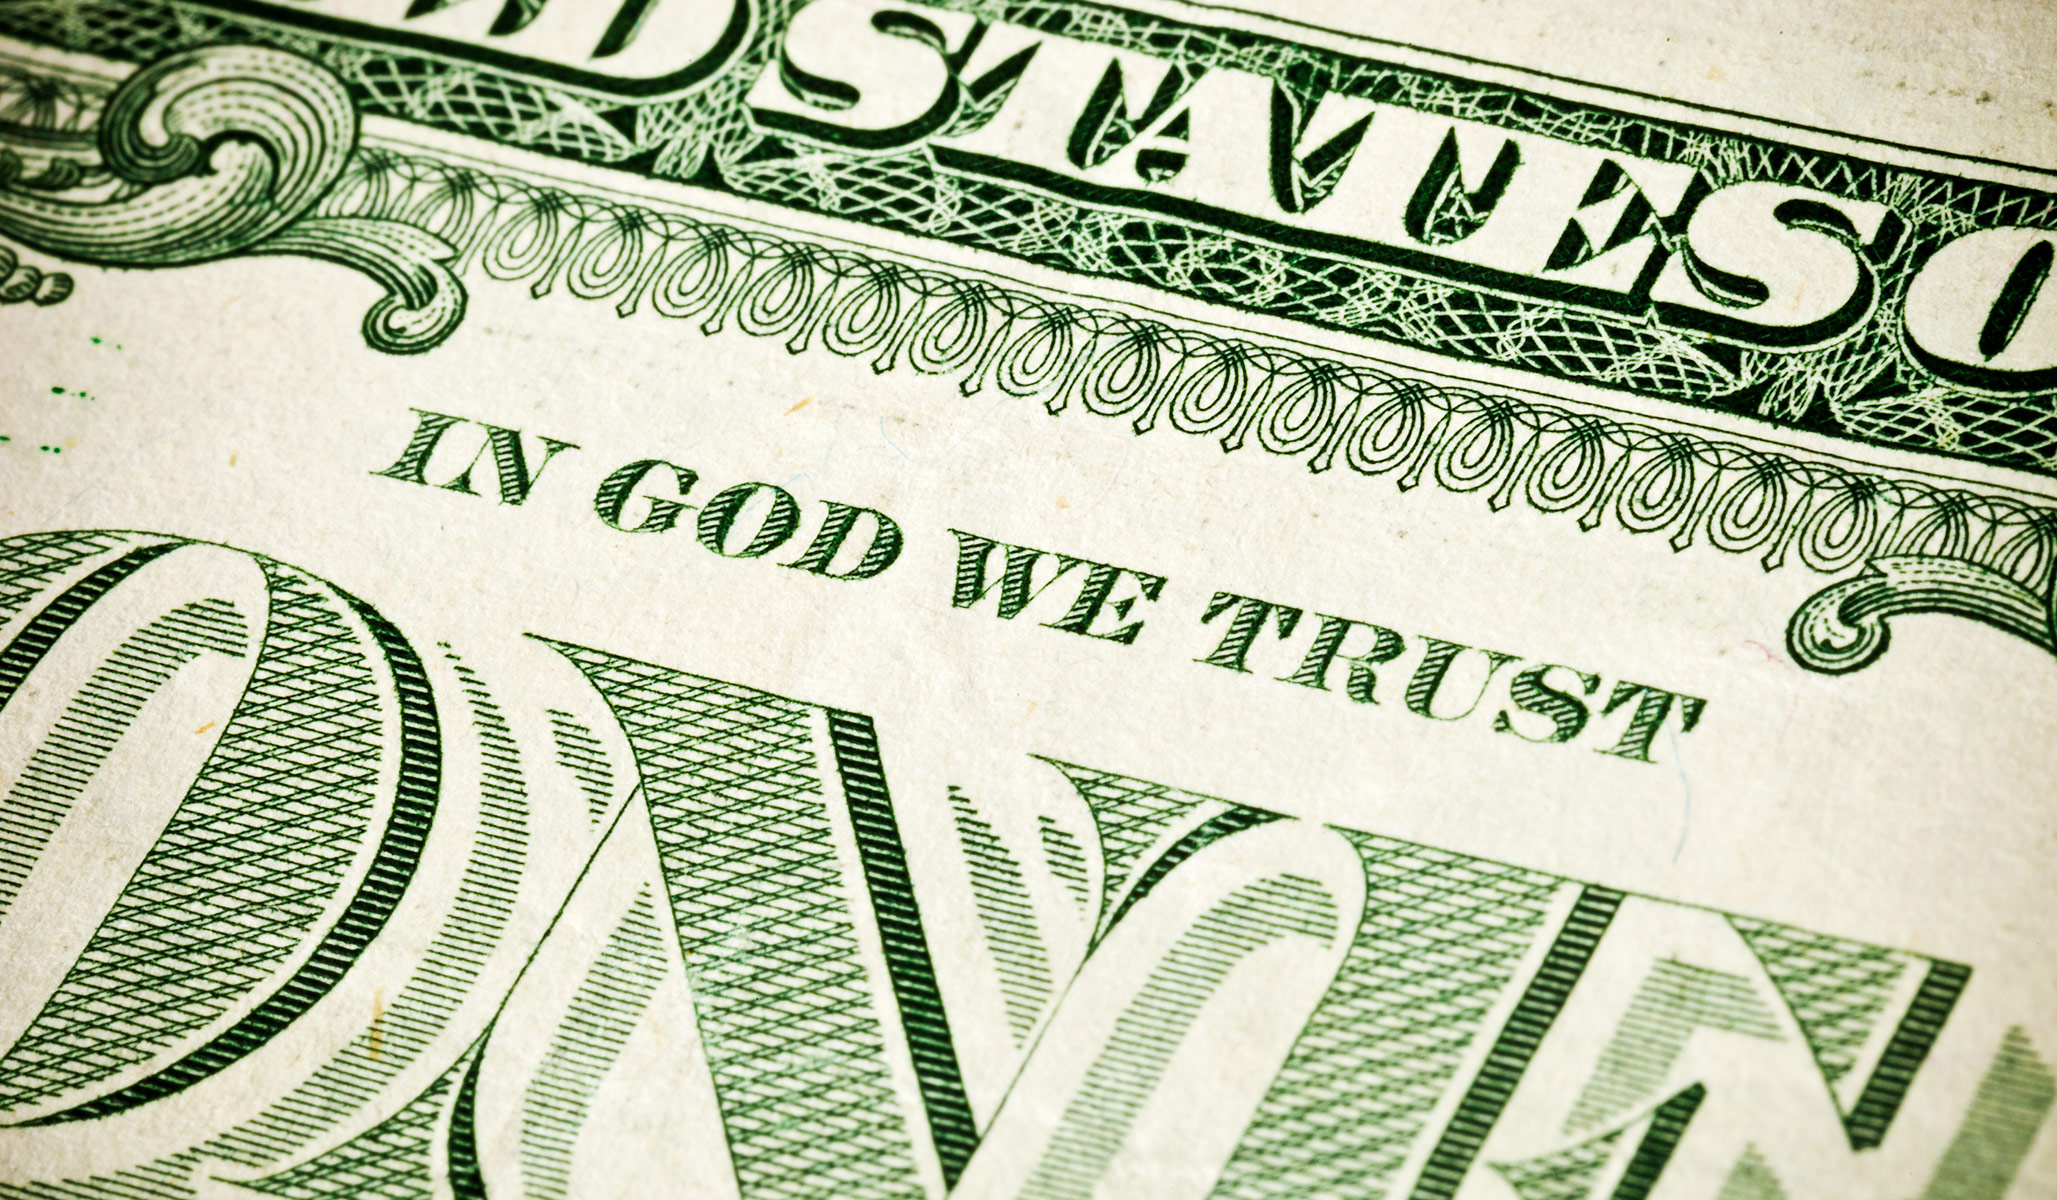 2. "In God we trust" money quote tattoo - wide 3